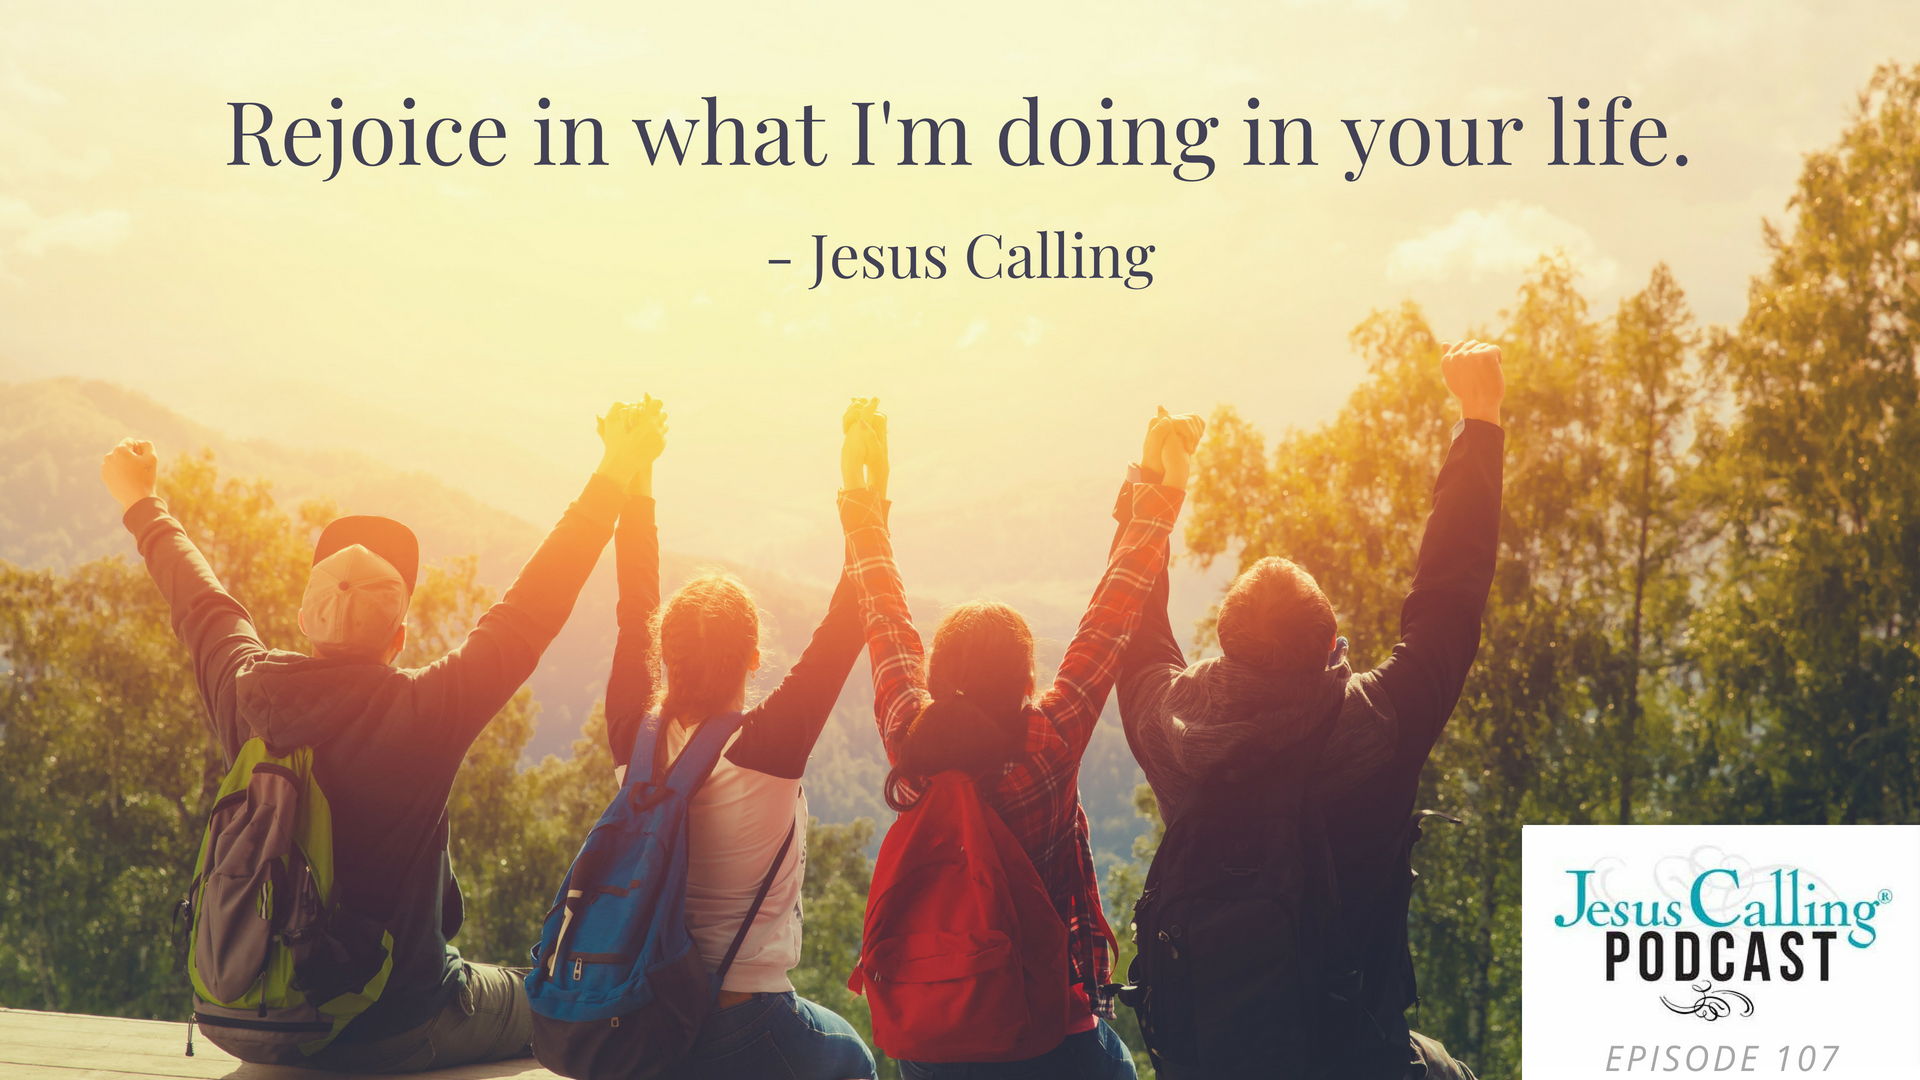 Jesus Calling episode #107 featuring Ainsley Earhardt & Andy Andrews